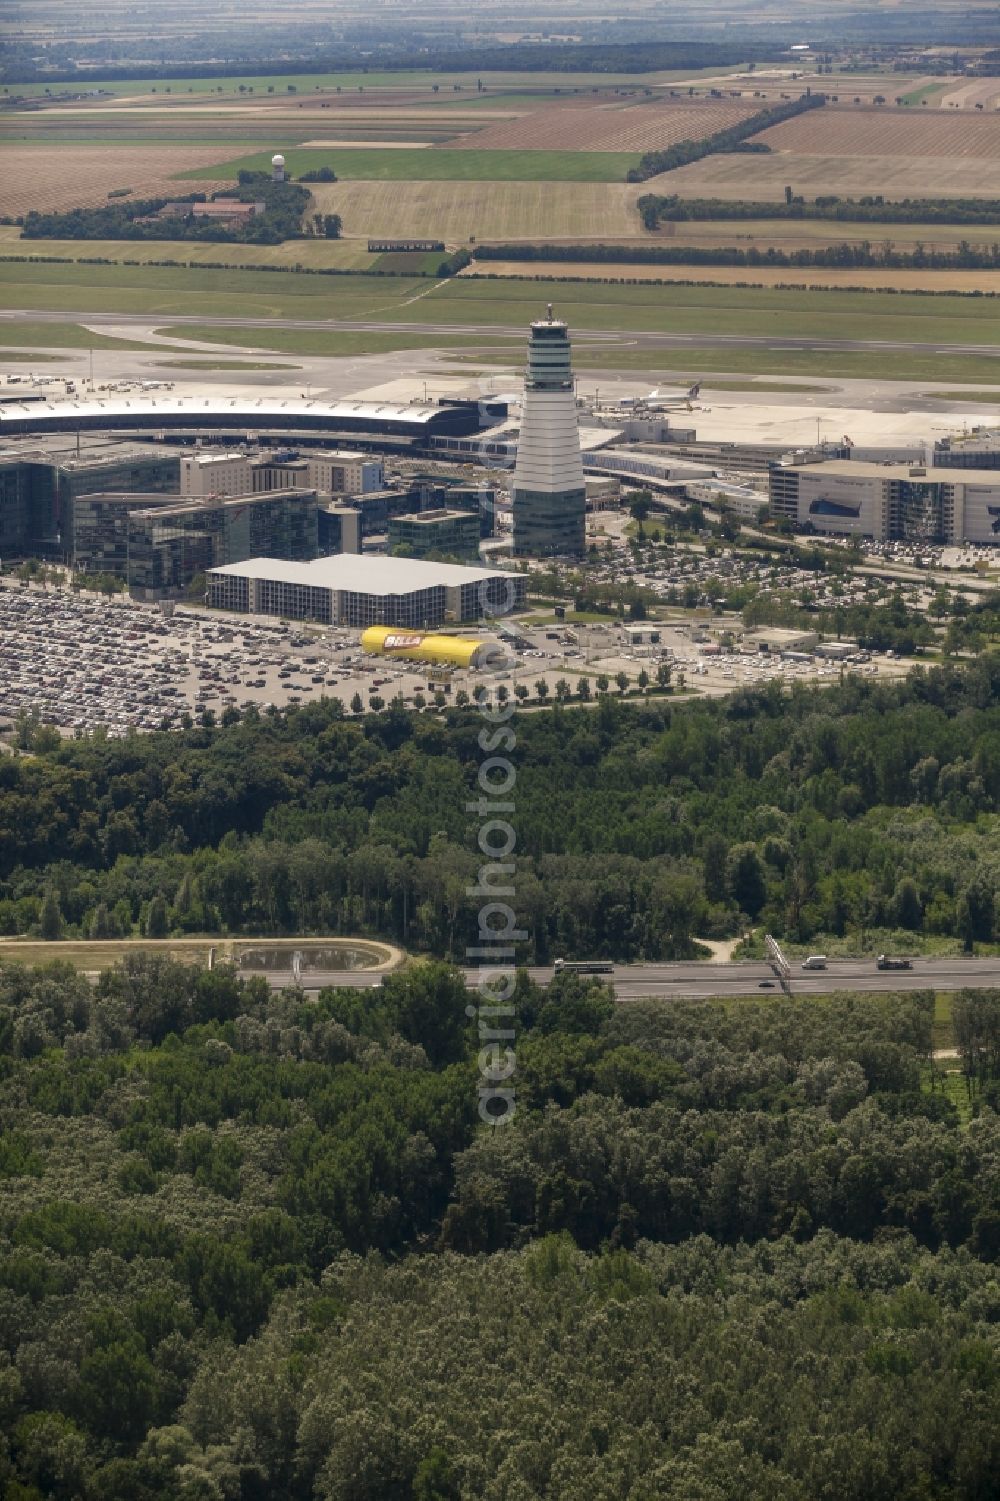 Schwechat from the bird's eye view: Tower and terminals on the premises of Vienna International Airport in Schwechat in Lower Austria, Austria